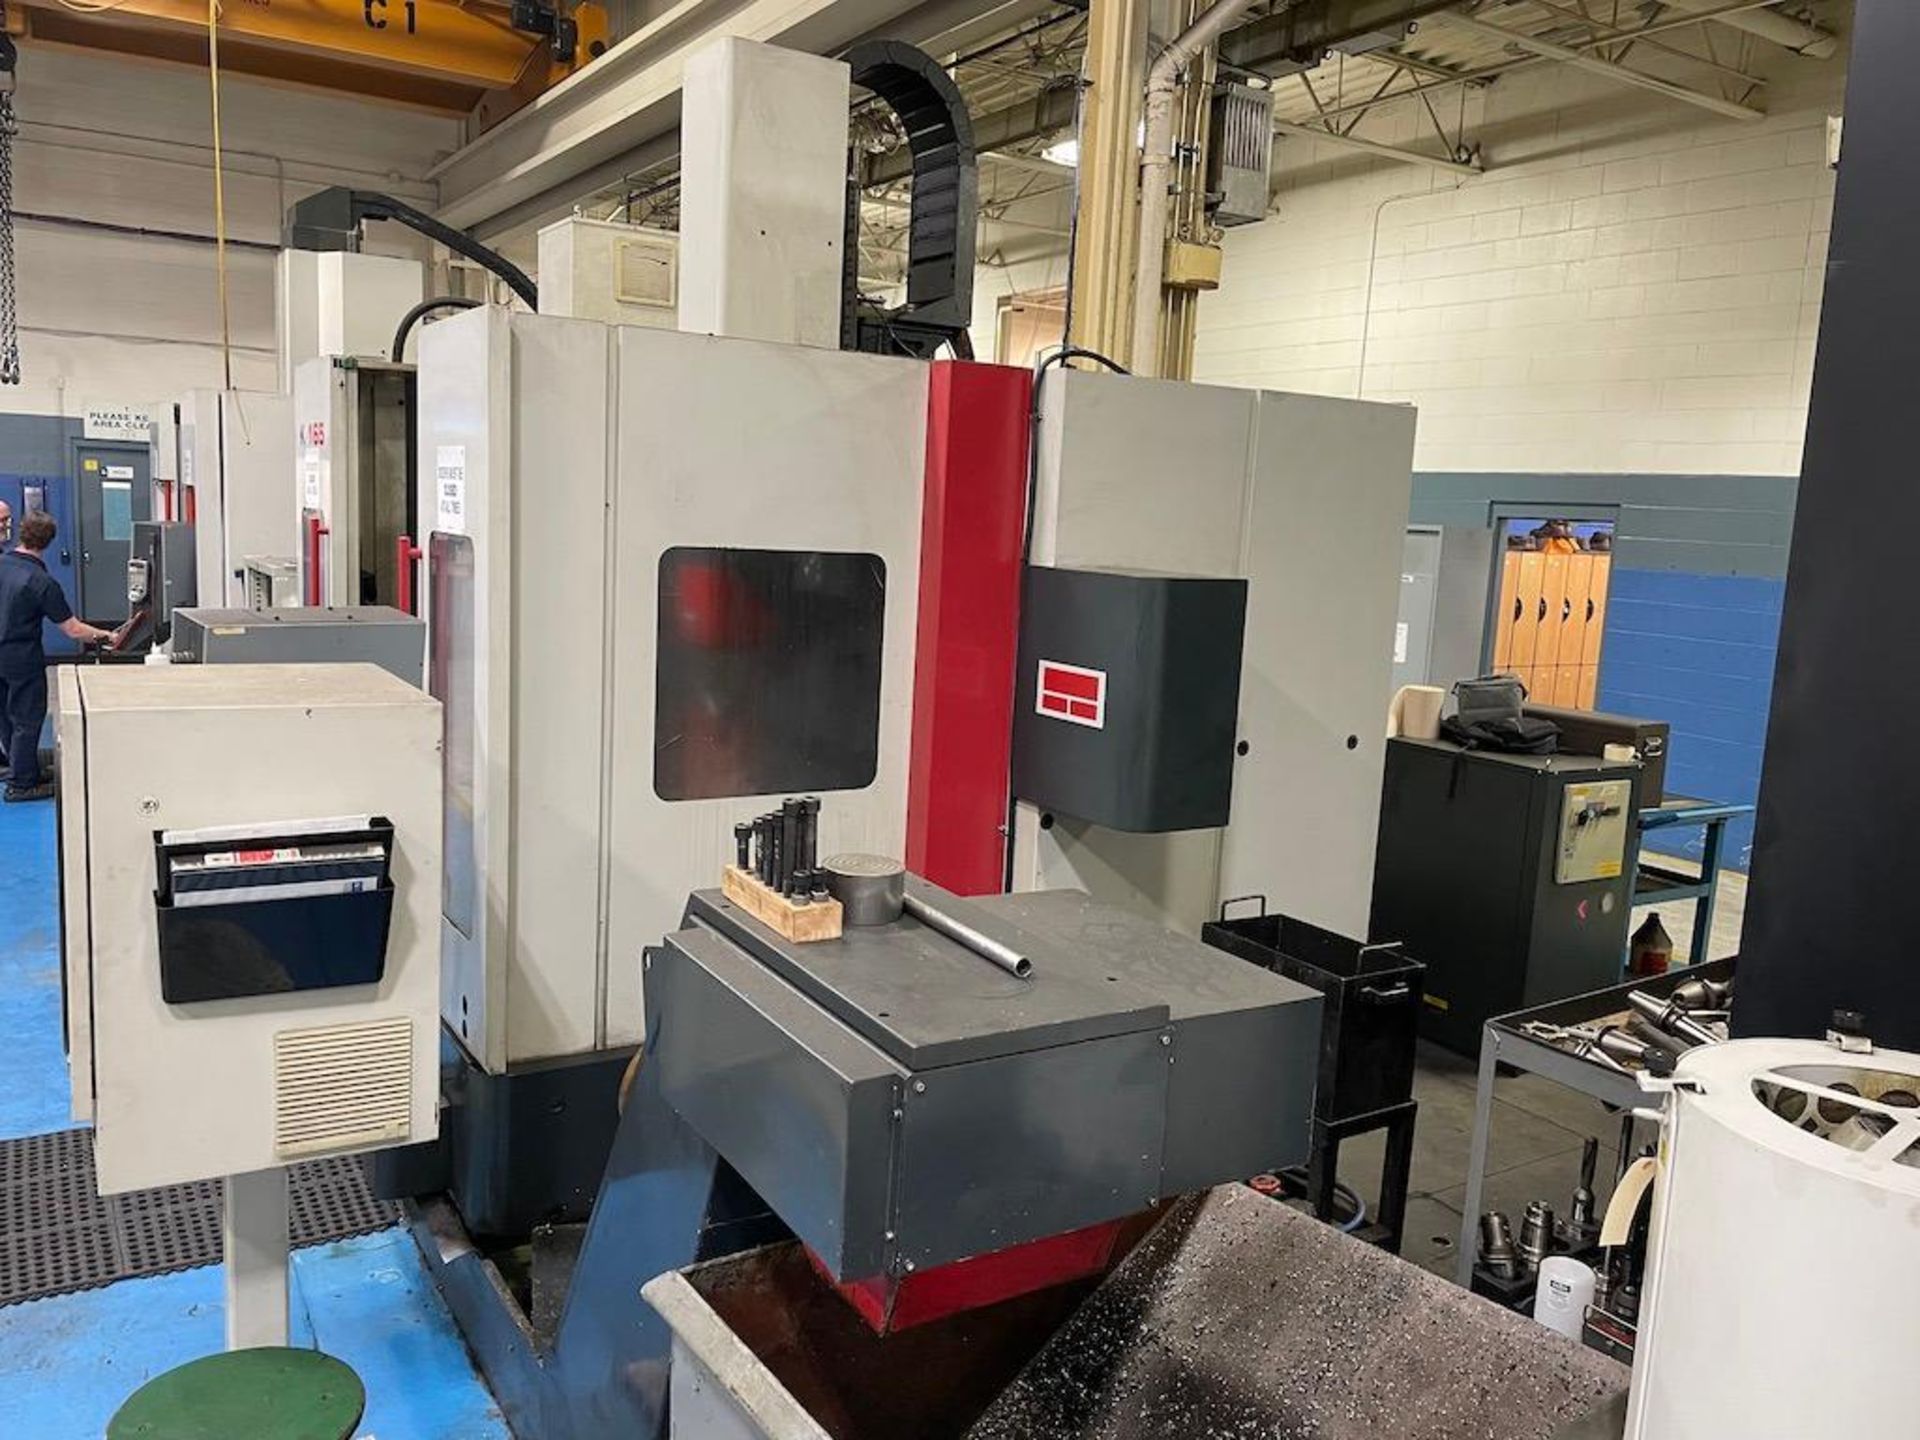 Fidia K165/BHS 3 + 2 High Speed CNC Vertical Machining Center, Fidia C20 CNC Control, Travels X-39.3 - Image 11 of 17